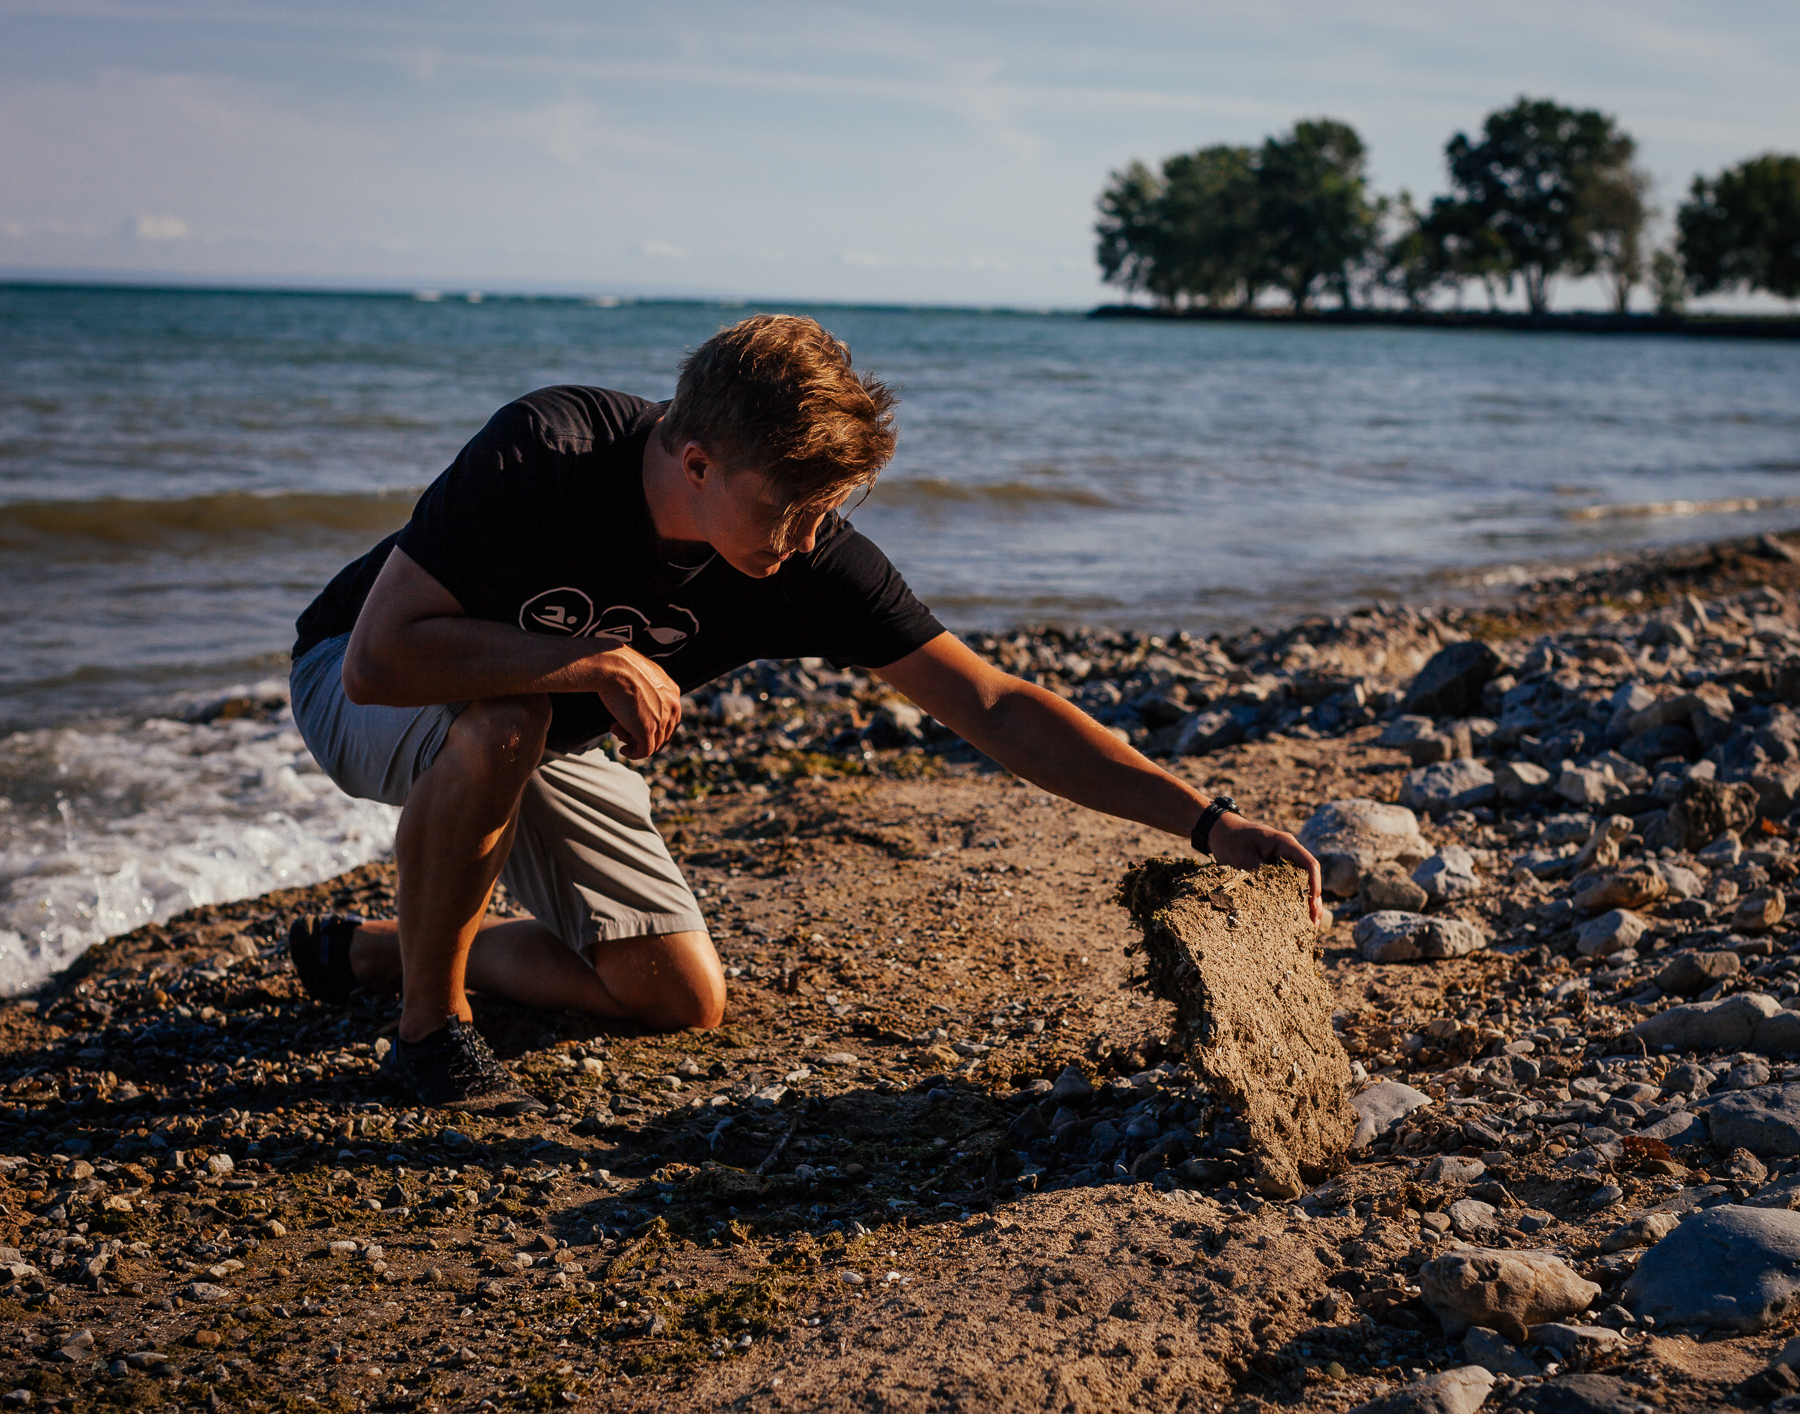 Gregary lifts a massive pile of dry Cladophora algae washed up on the shore Lorraine Bay in Port Colborne.